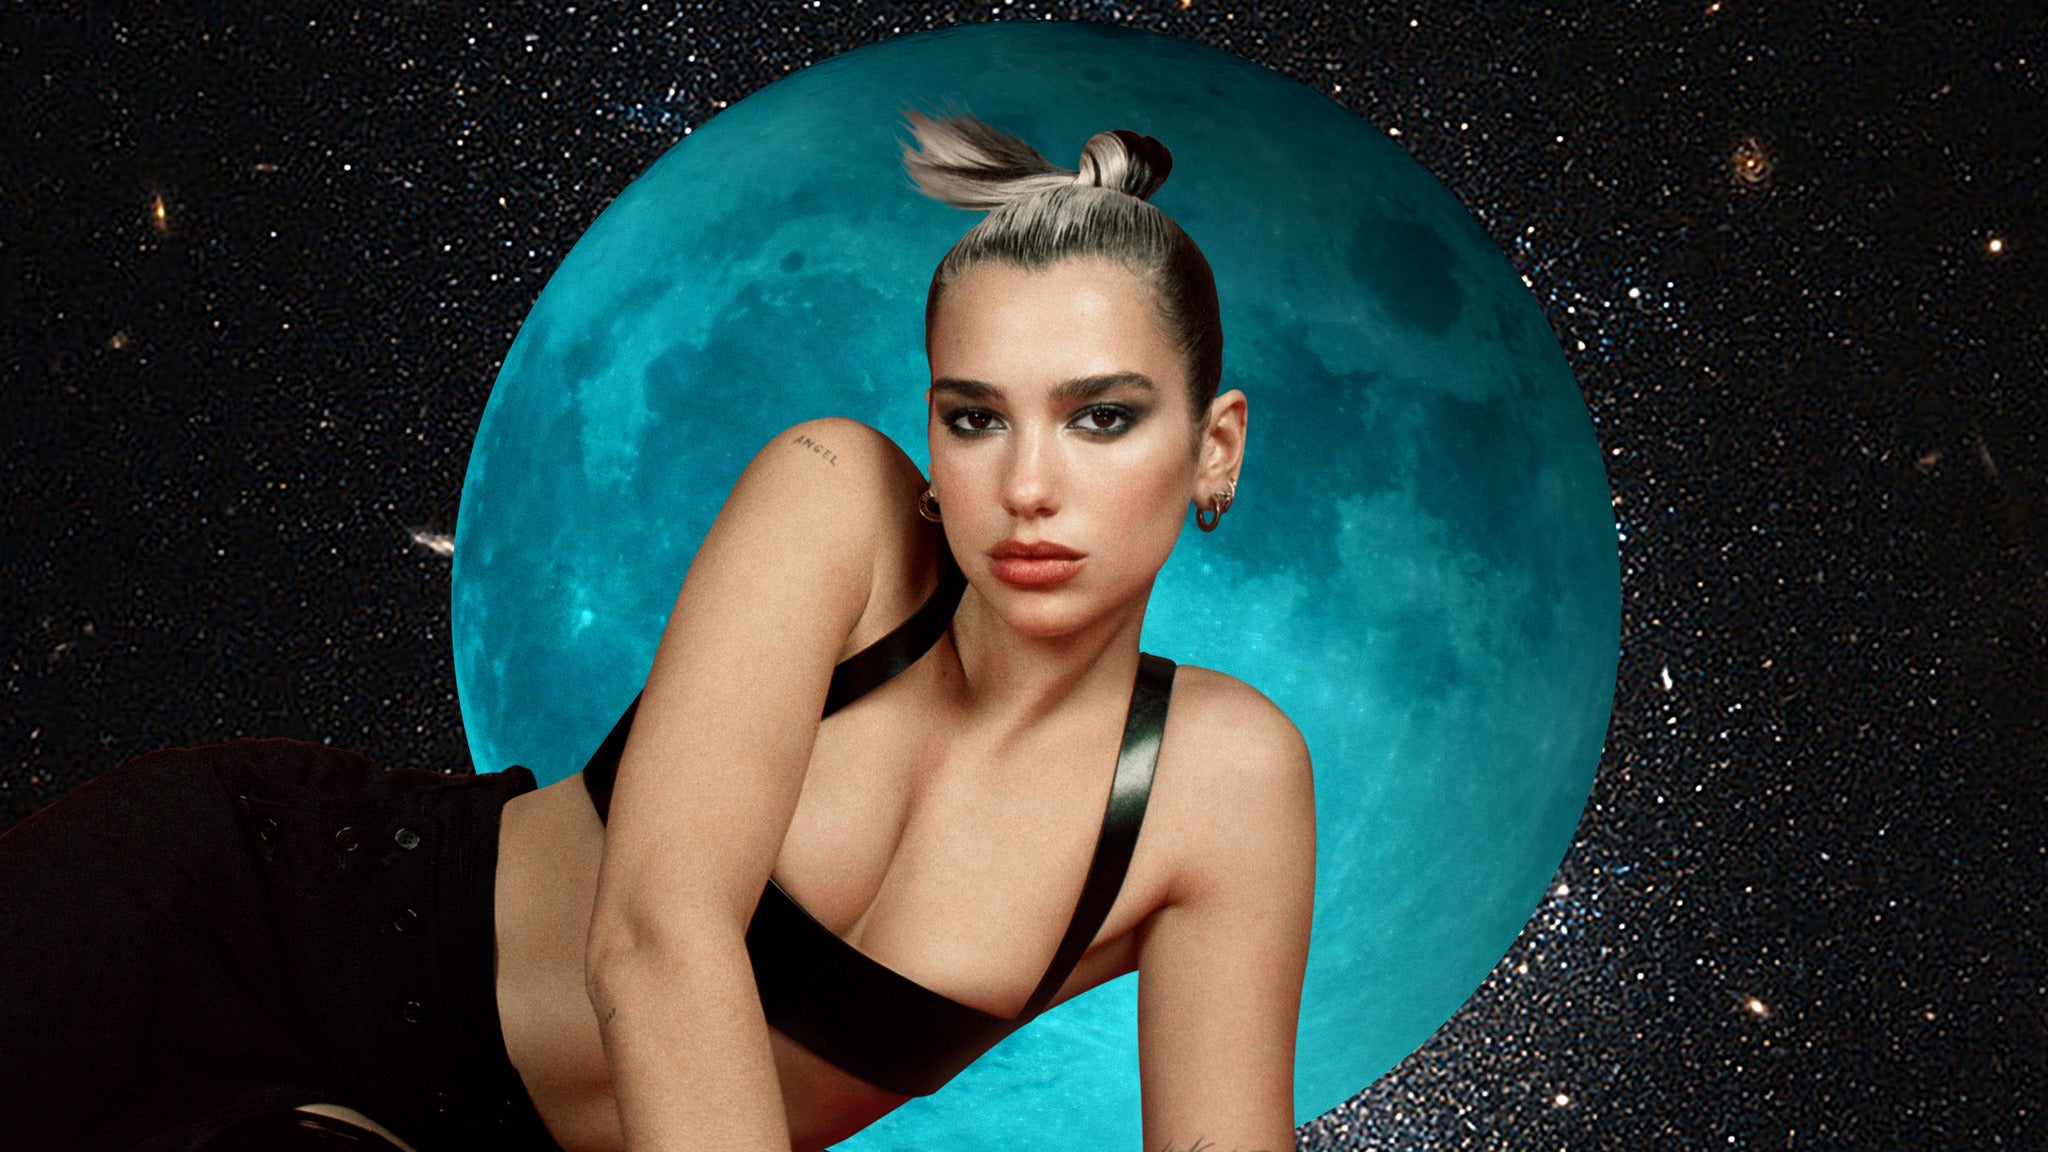 Governors Ball Presents: Dua Lipa in New York promo photo for Live Nation Mobile App presale offer code